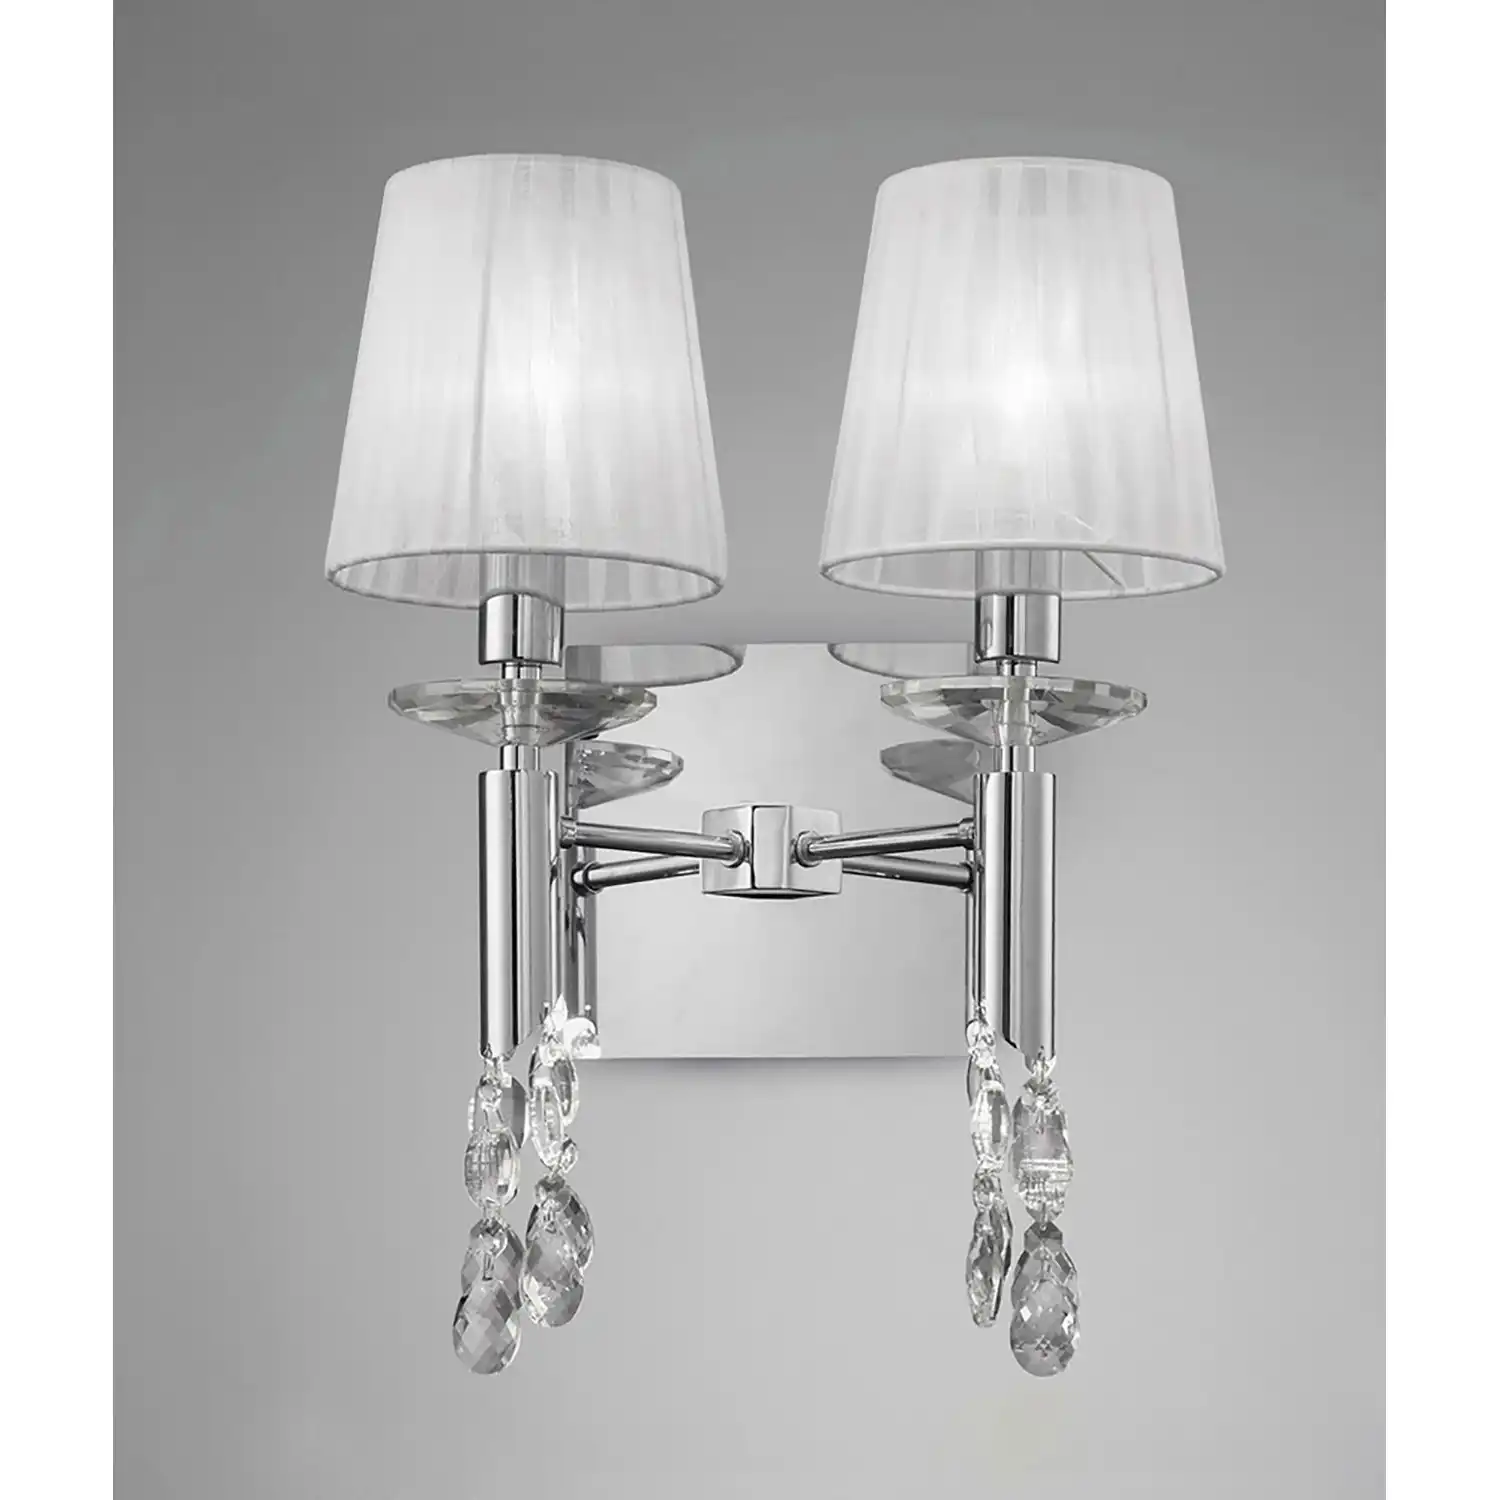 Tiffany Wall Lamp Switched 2+2 Light E14+G9, Polished Chrome With White Shades And Clear Crystal